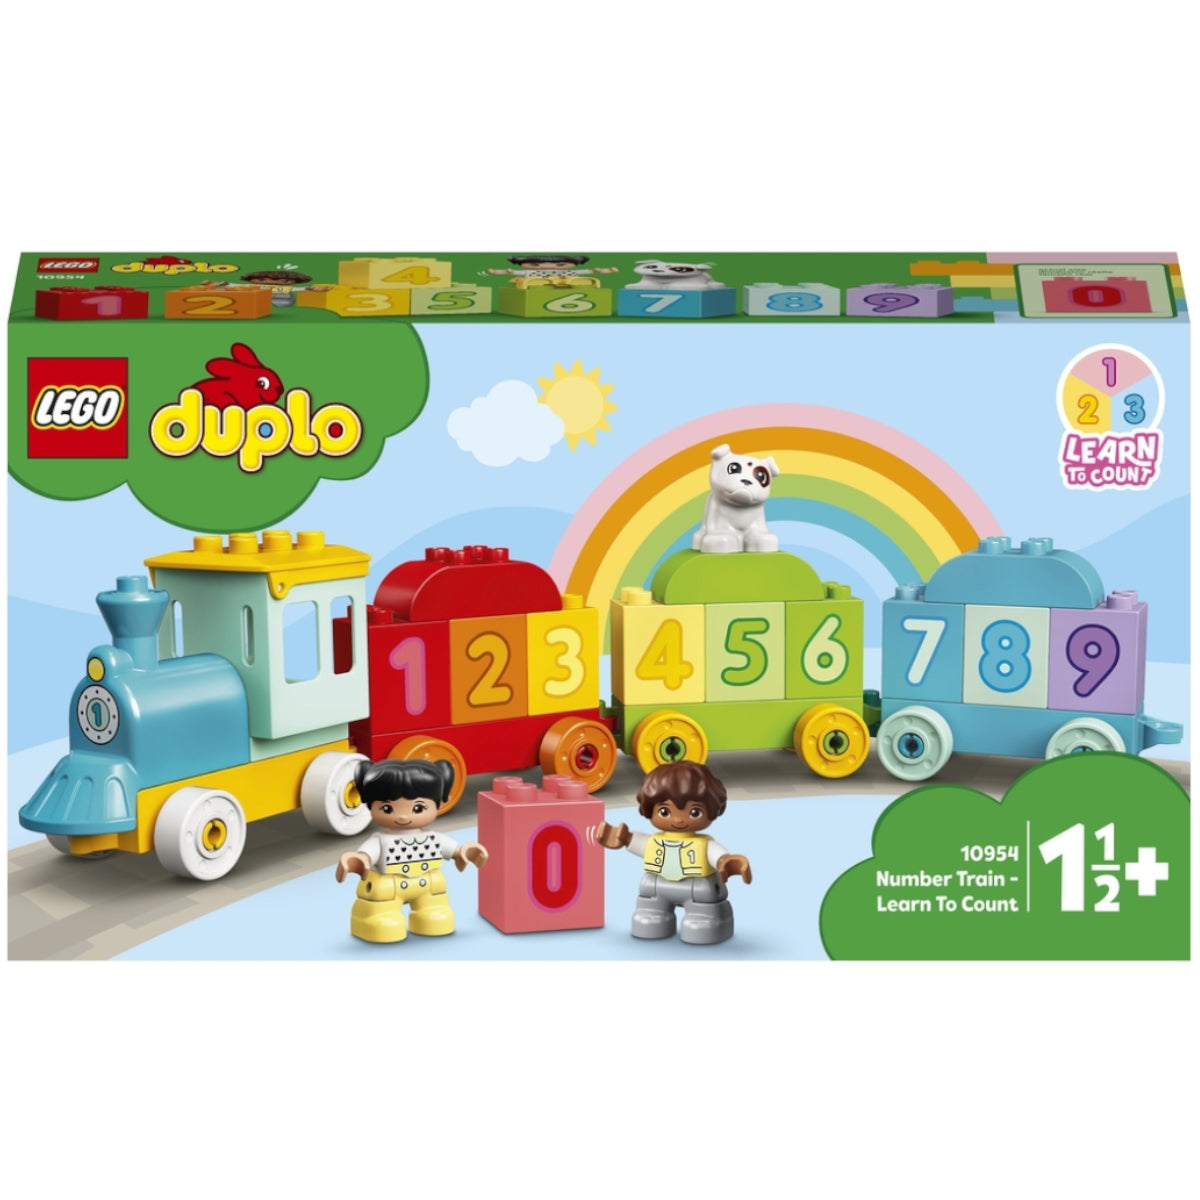 DUPLO by LEGO Number Train Learn to Count 10954